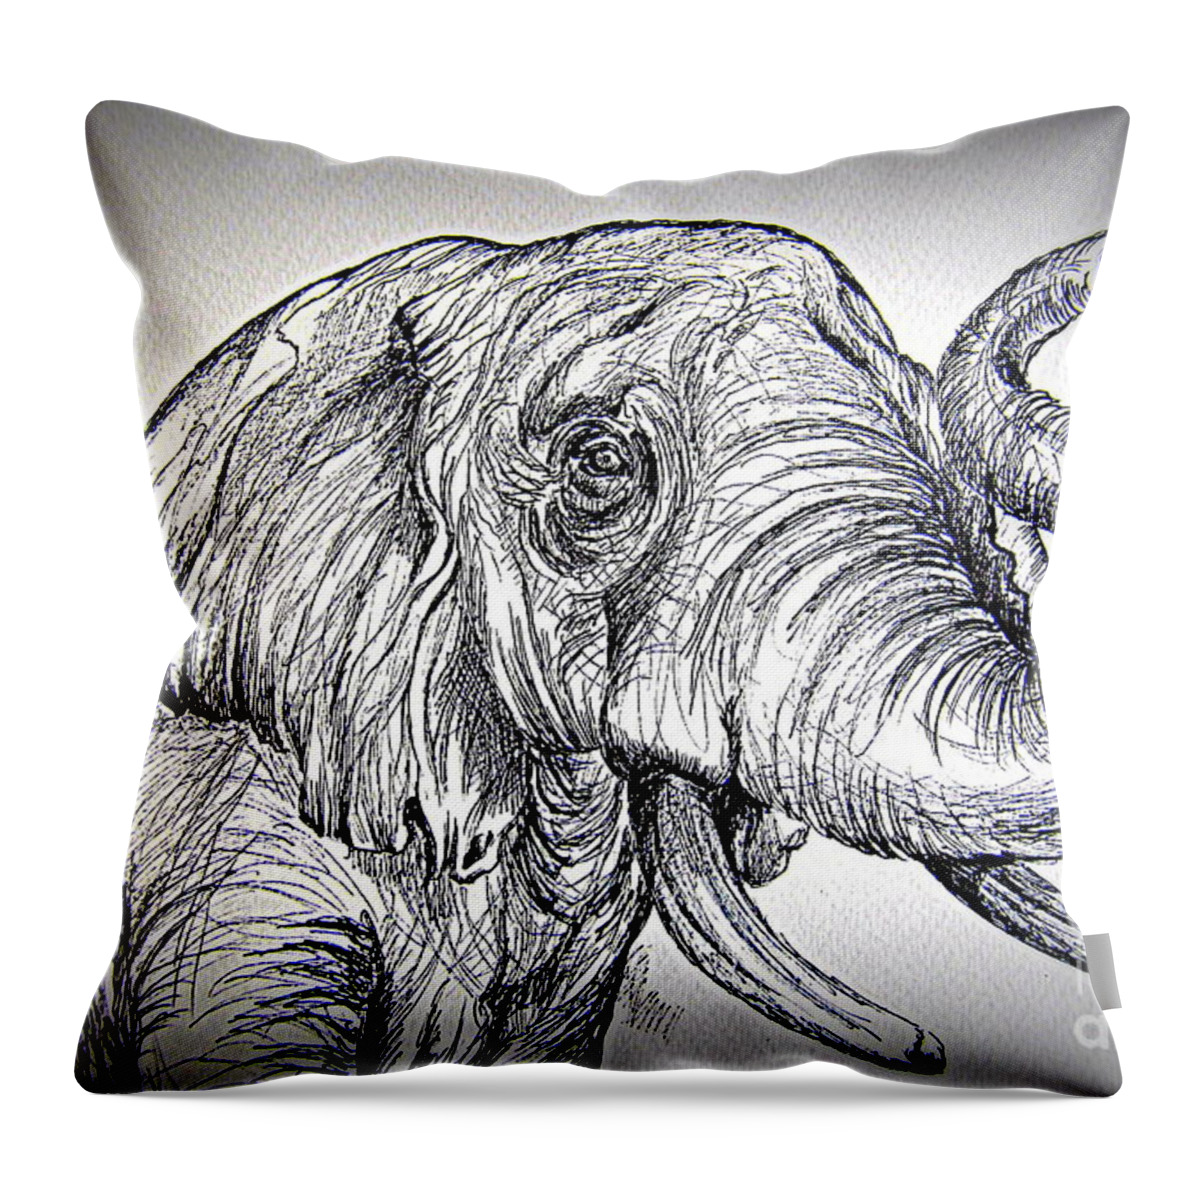 African Elephant Throw Pillow featuring the painting Barrito dell elefante by Roberto Gagliardi